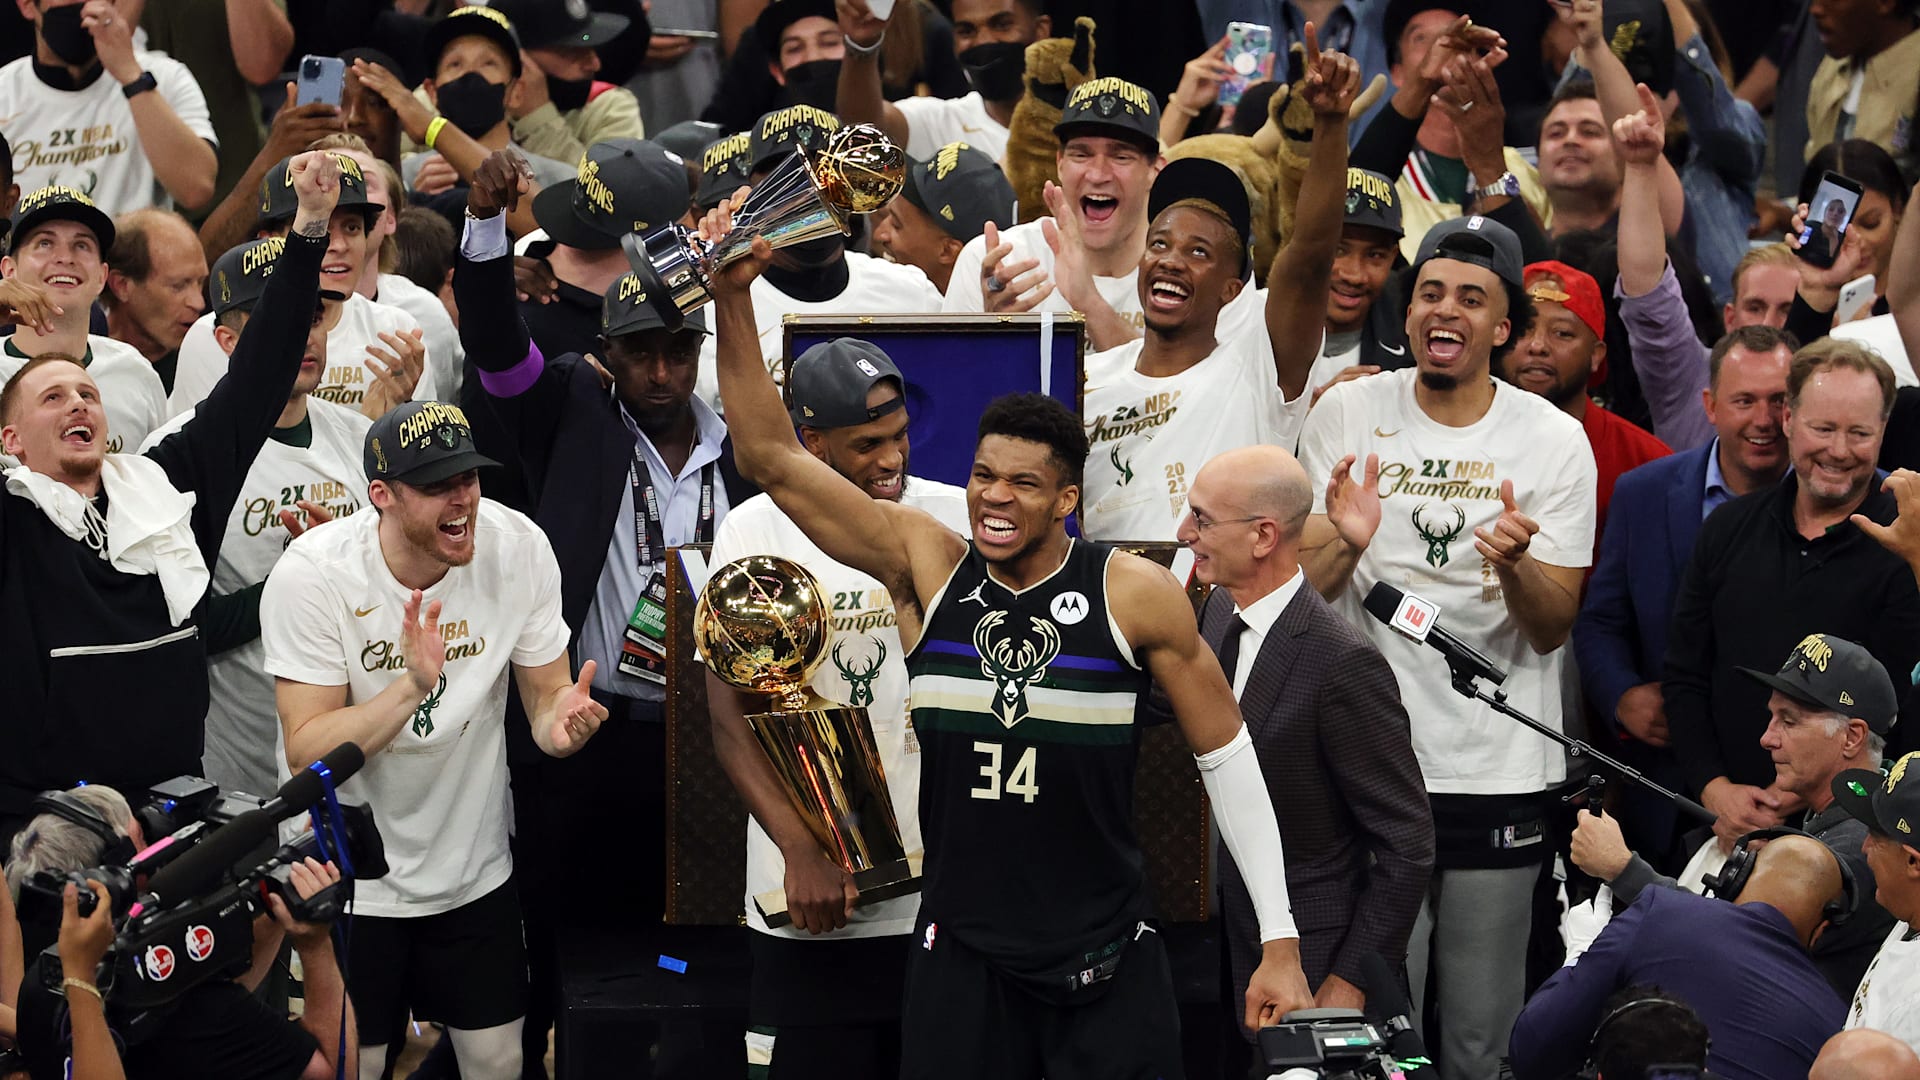 The Milwaukee Bucks are NBA champions for the first time in 50 years as  Antetokounmpo scores 50 points